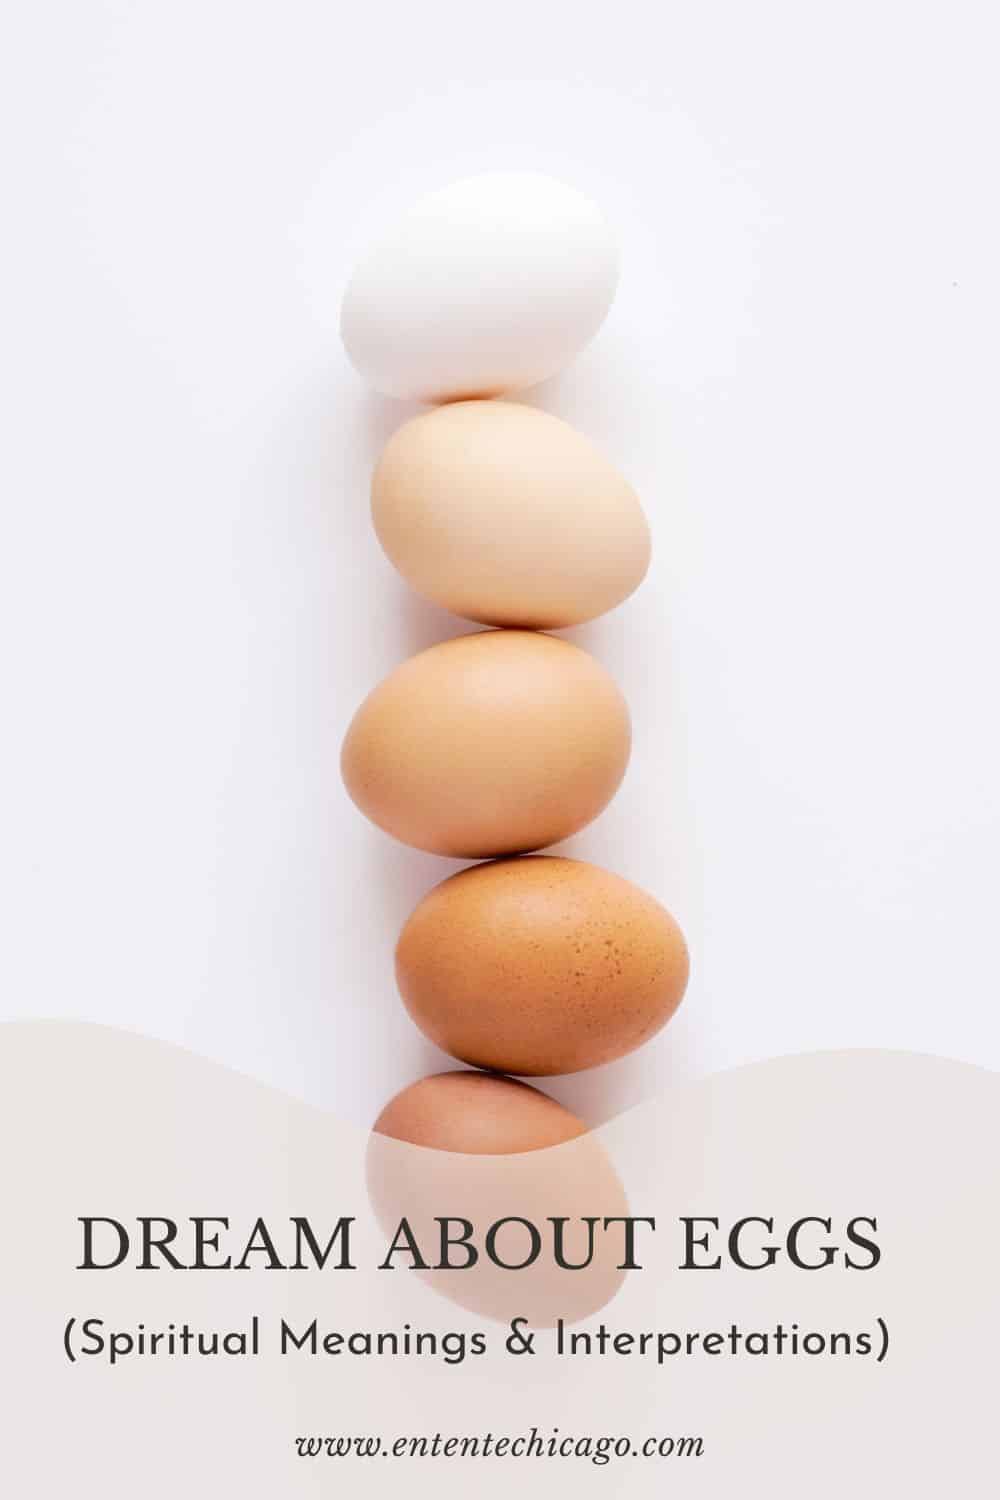 What Does Dreaming About Eggs Mean